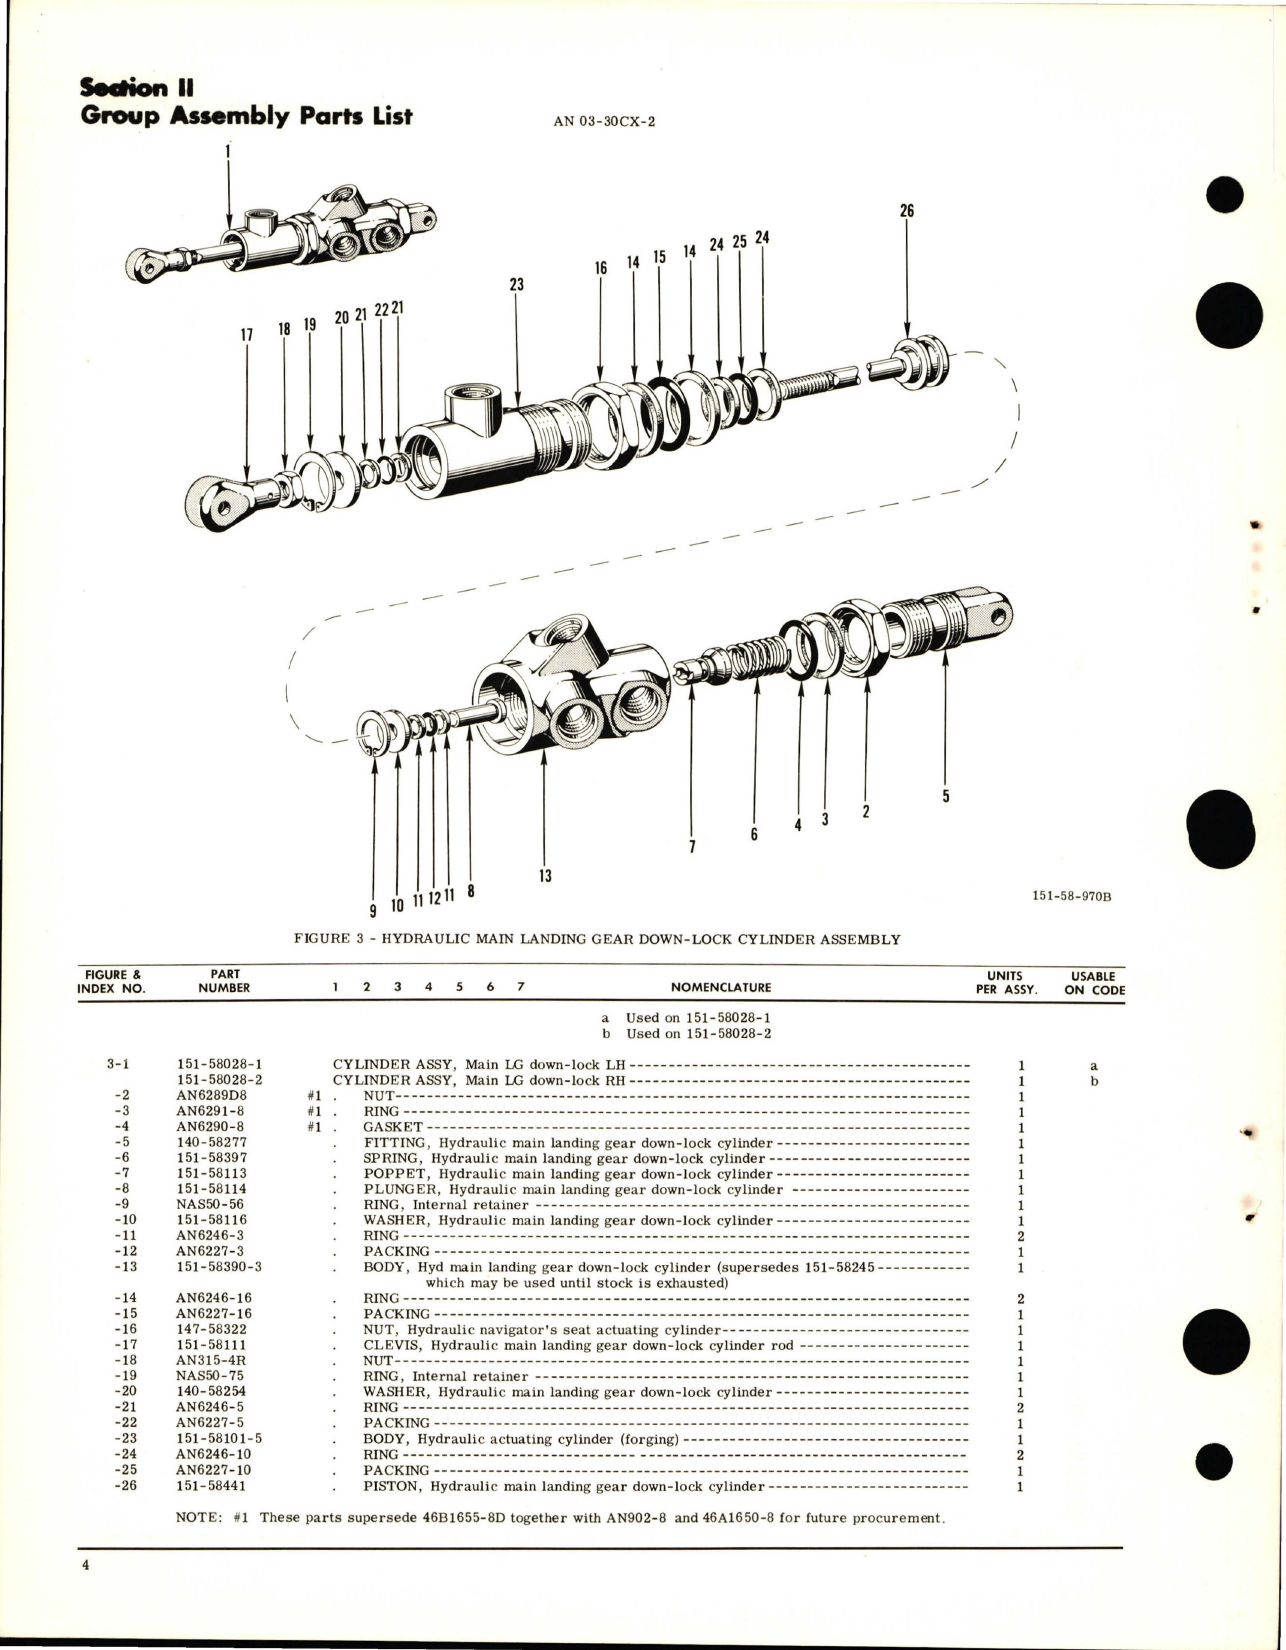 Sample page 8 from AirCorps Library document: Illustrated Parts Breakdown for Hydraulic Actuating Cylinders 